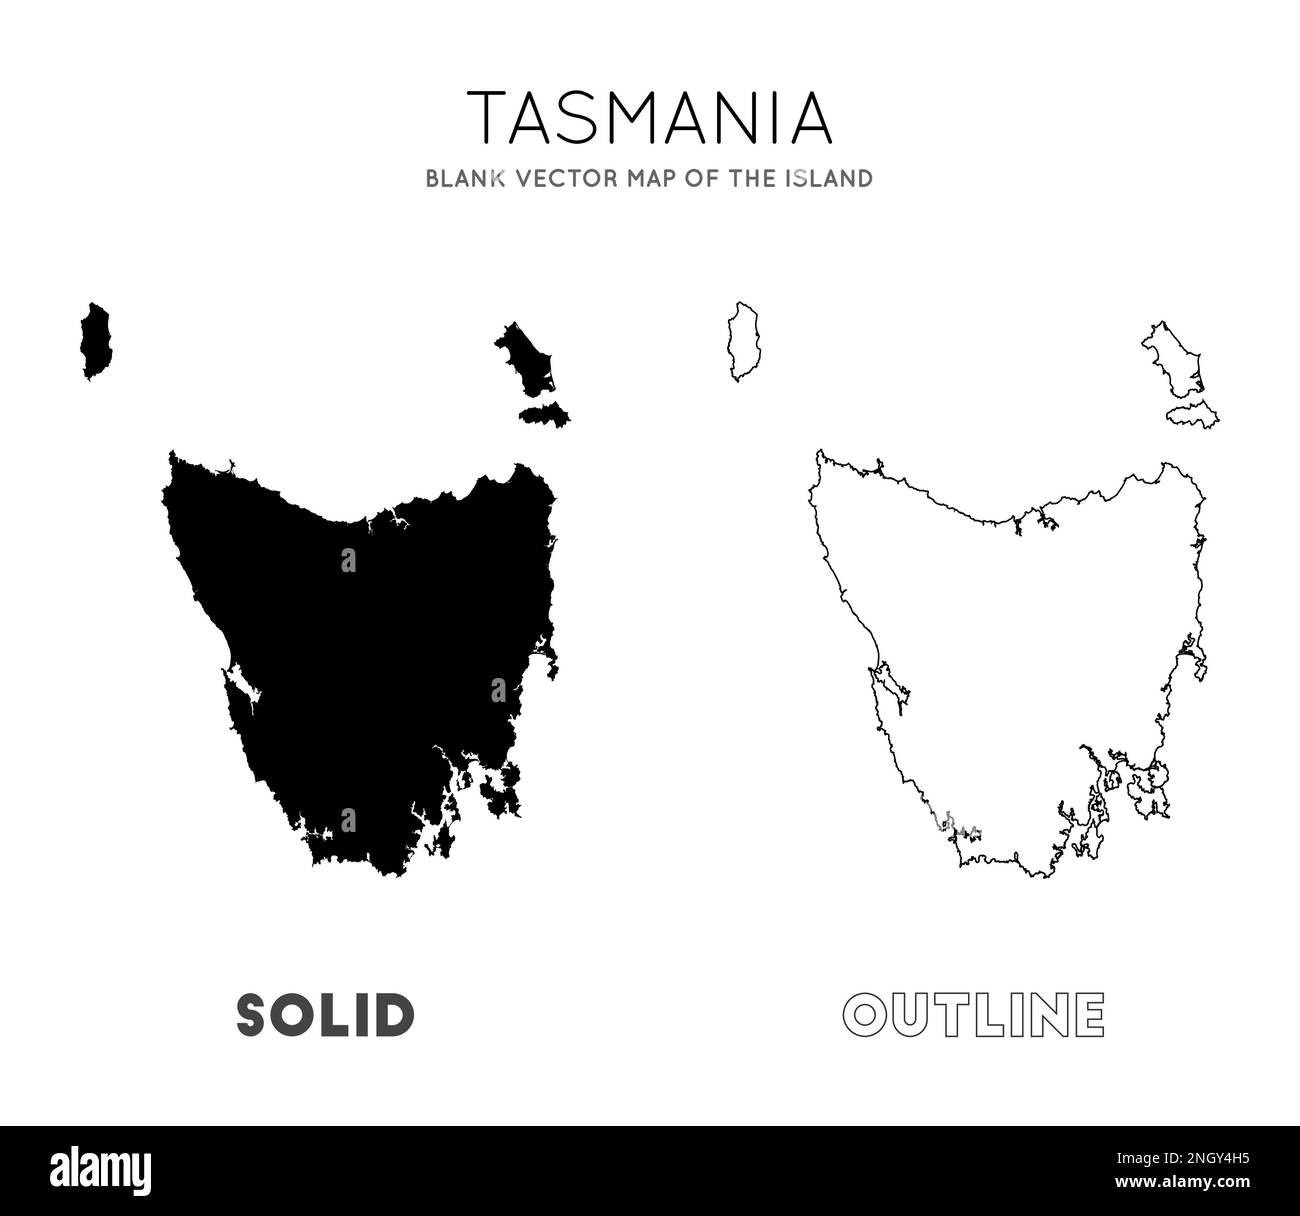 Tasmania map. Blank vector map of the Island. Borders of Tasmania for your infographic. Vector illustration. Stock Vector